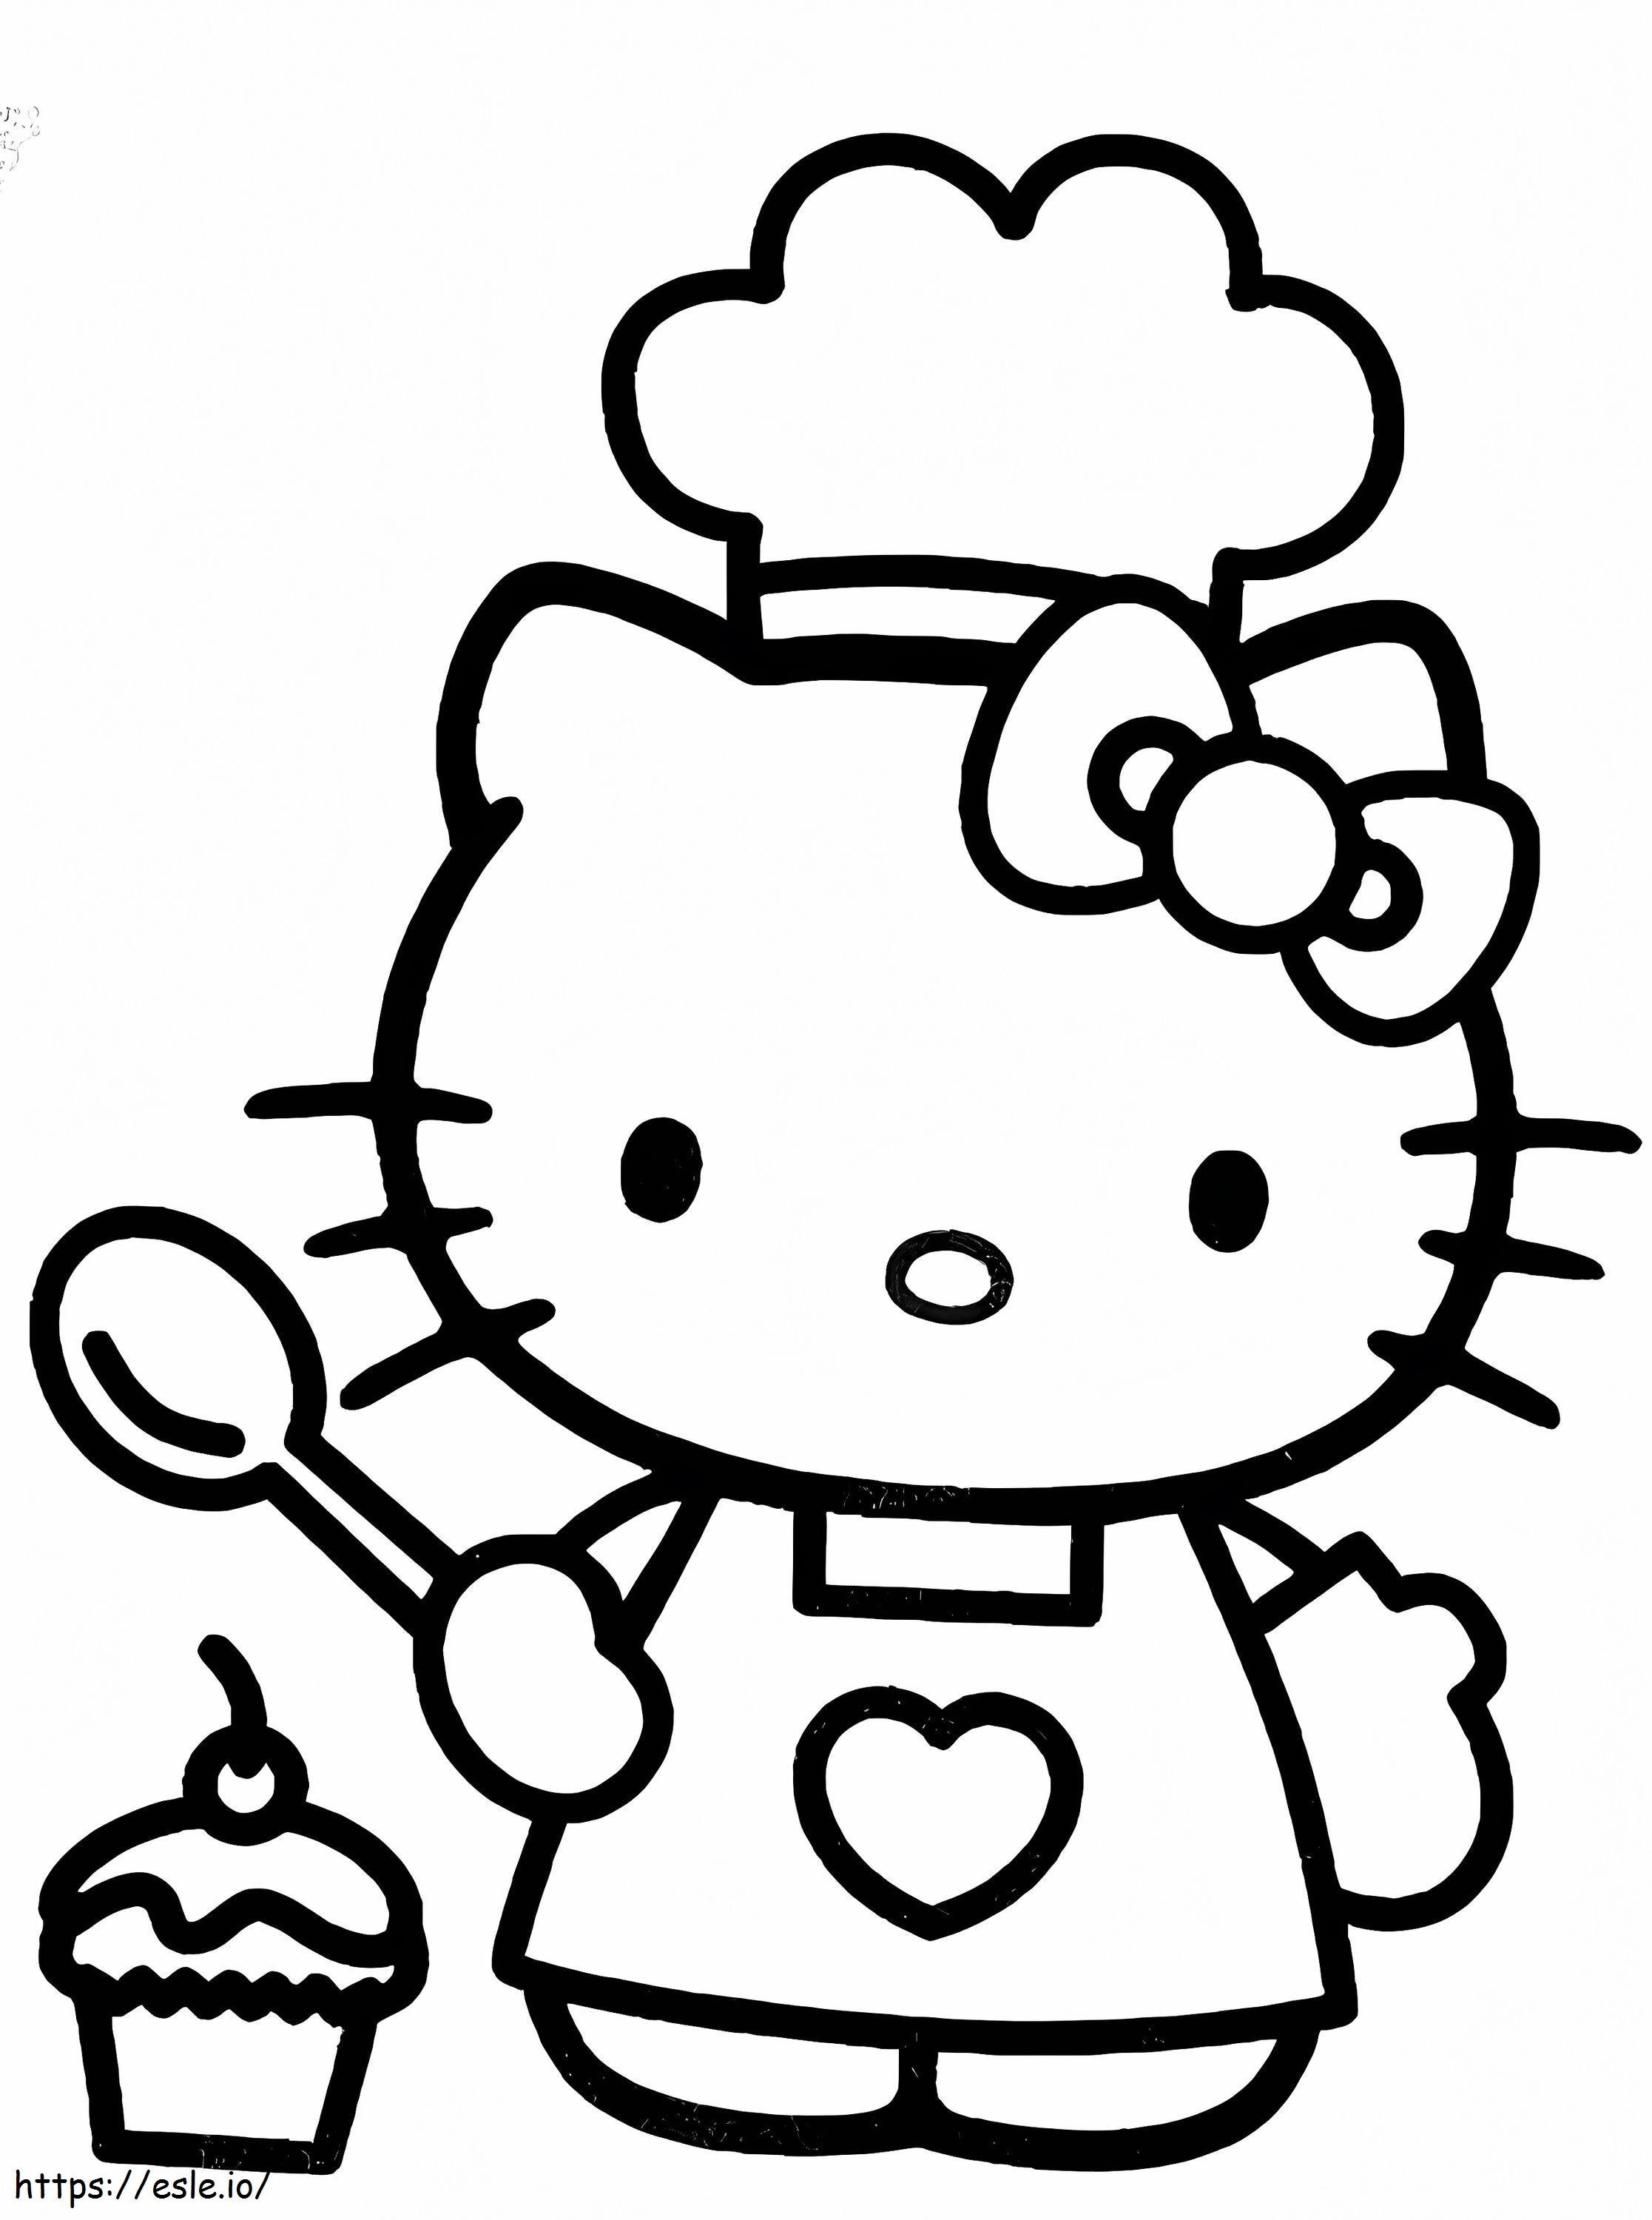 Make A Kitty Cake coloring page